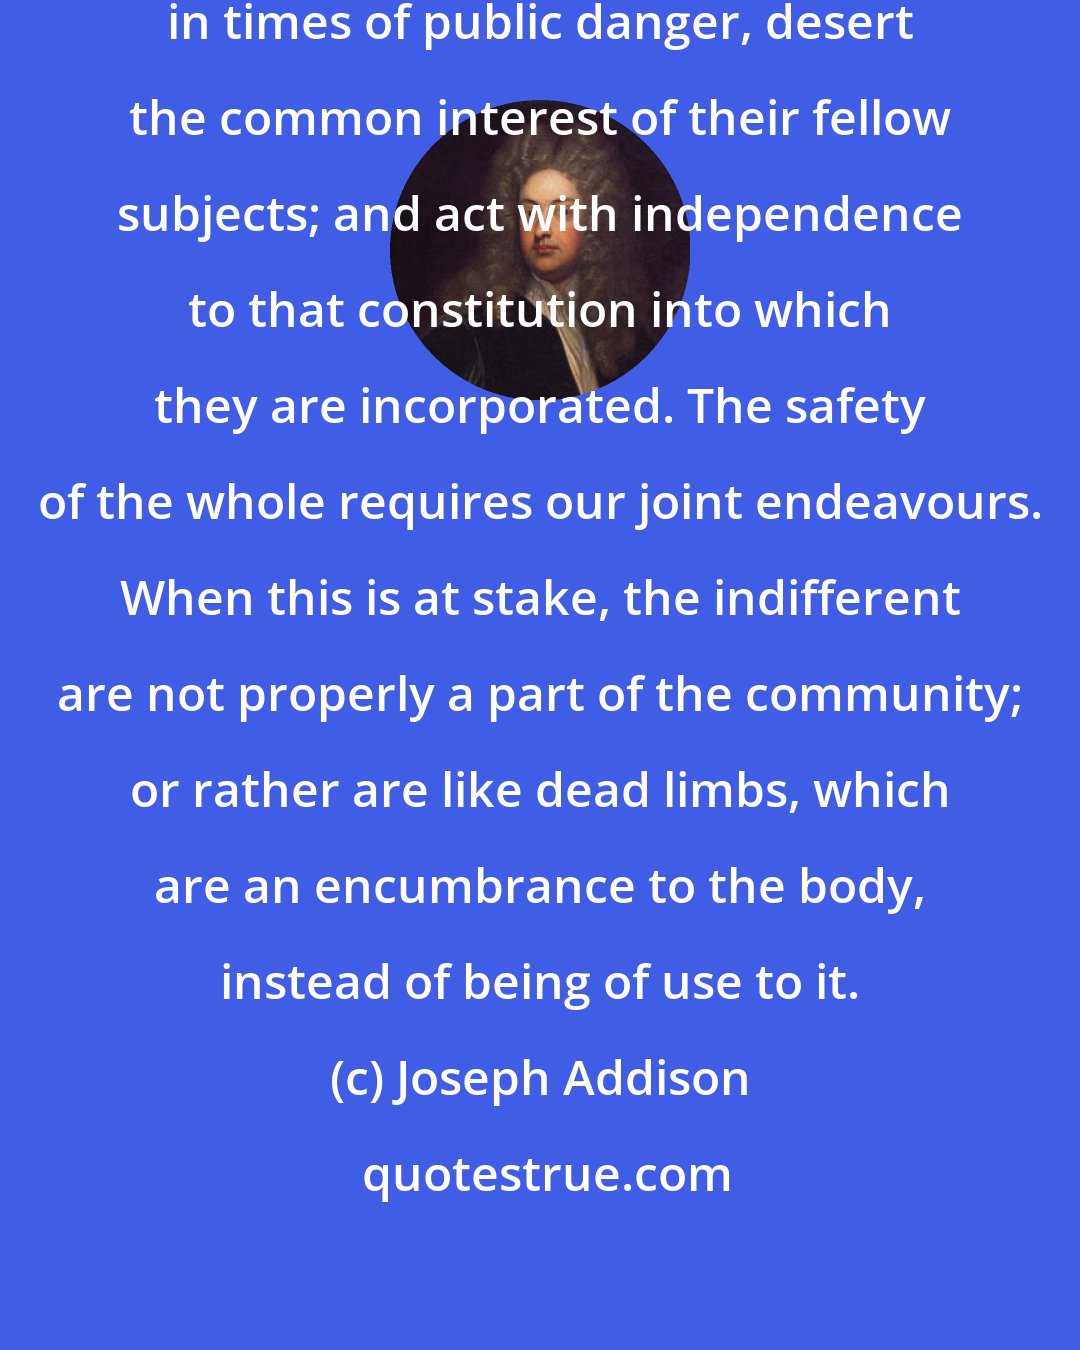 Joseph Addison: Men who profess a state of neutrality in times of public danger, desert the common interest of their fellow subjects; and act with independence to that constitution into which they are incorporated. The safety of the whole requires our joint endeavours. When this is at stake, the indifferent are not properly a part of the community; or rather are like dead limbs, which are an encumbrance to the body, instead of being of use to it.